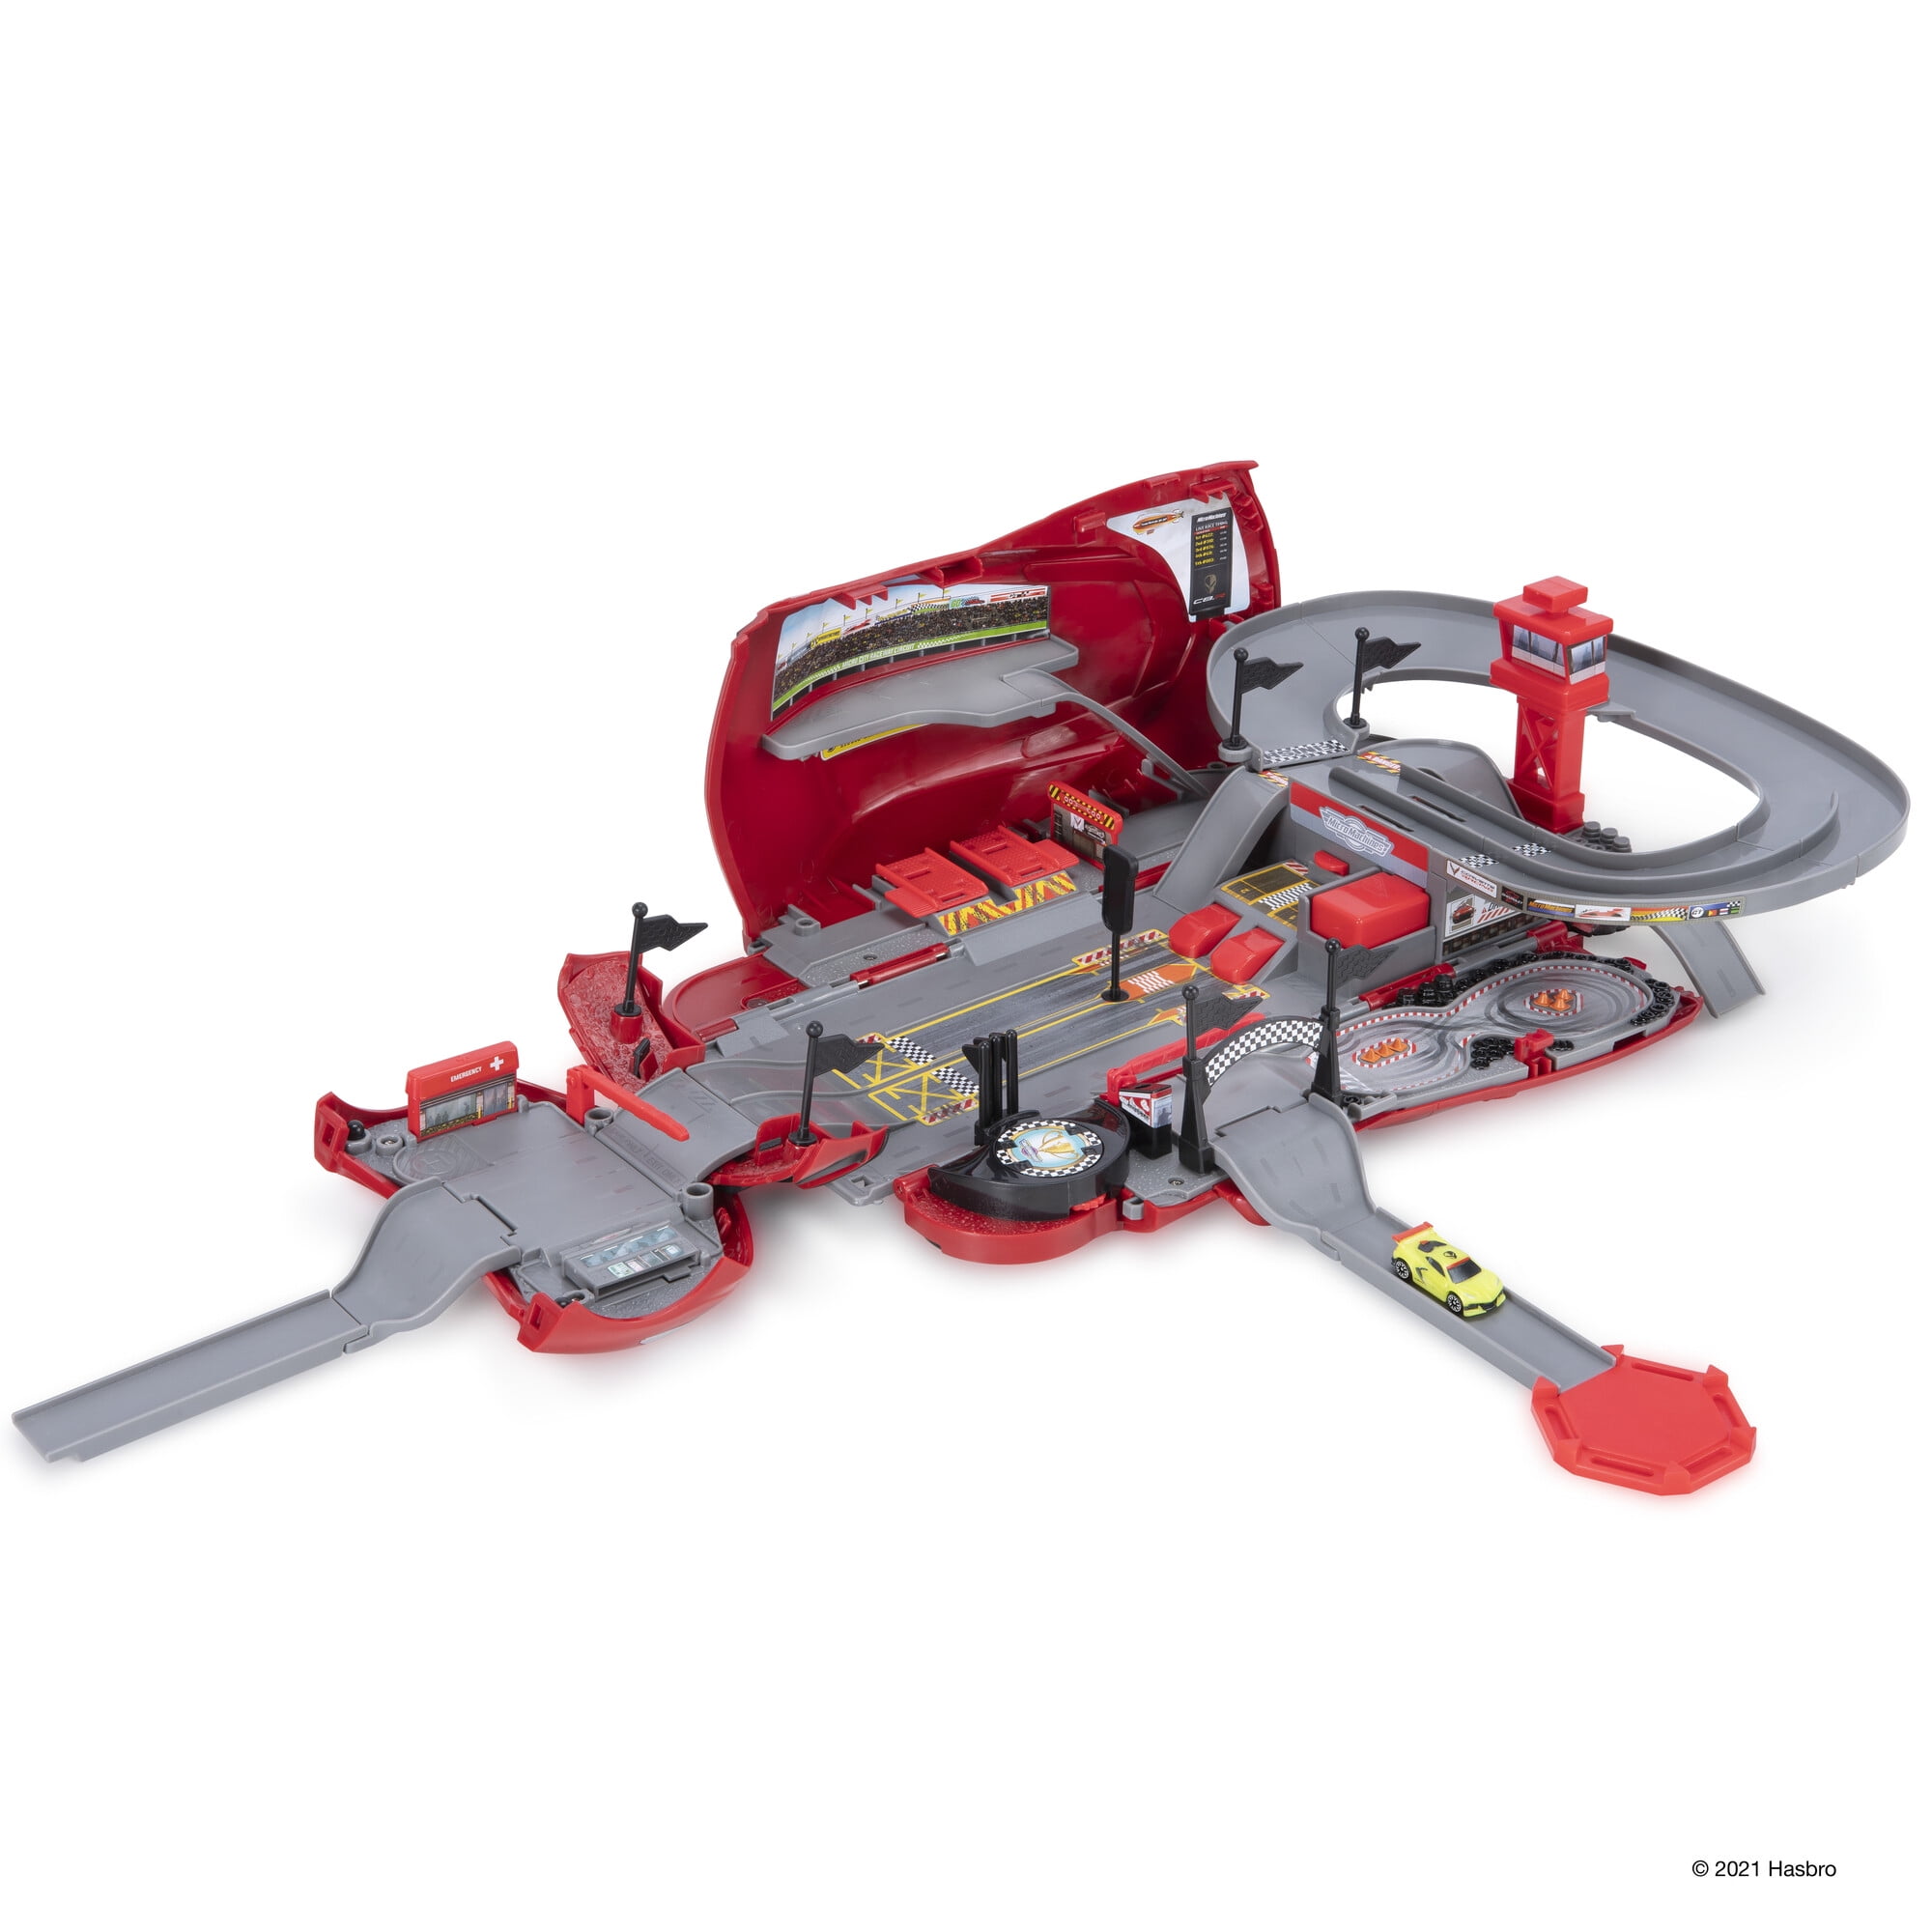 Micro Machines Corvette Raceway Transforming Corvette into Raceway Playset  - Toy Cars for Kids and Collectors - Collect Them All -  Exclusive